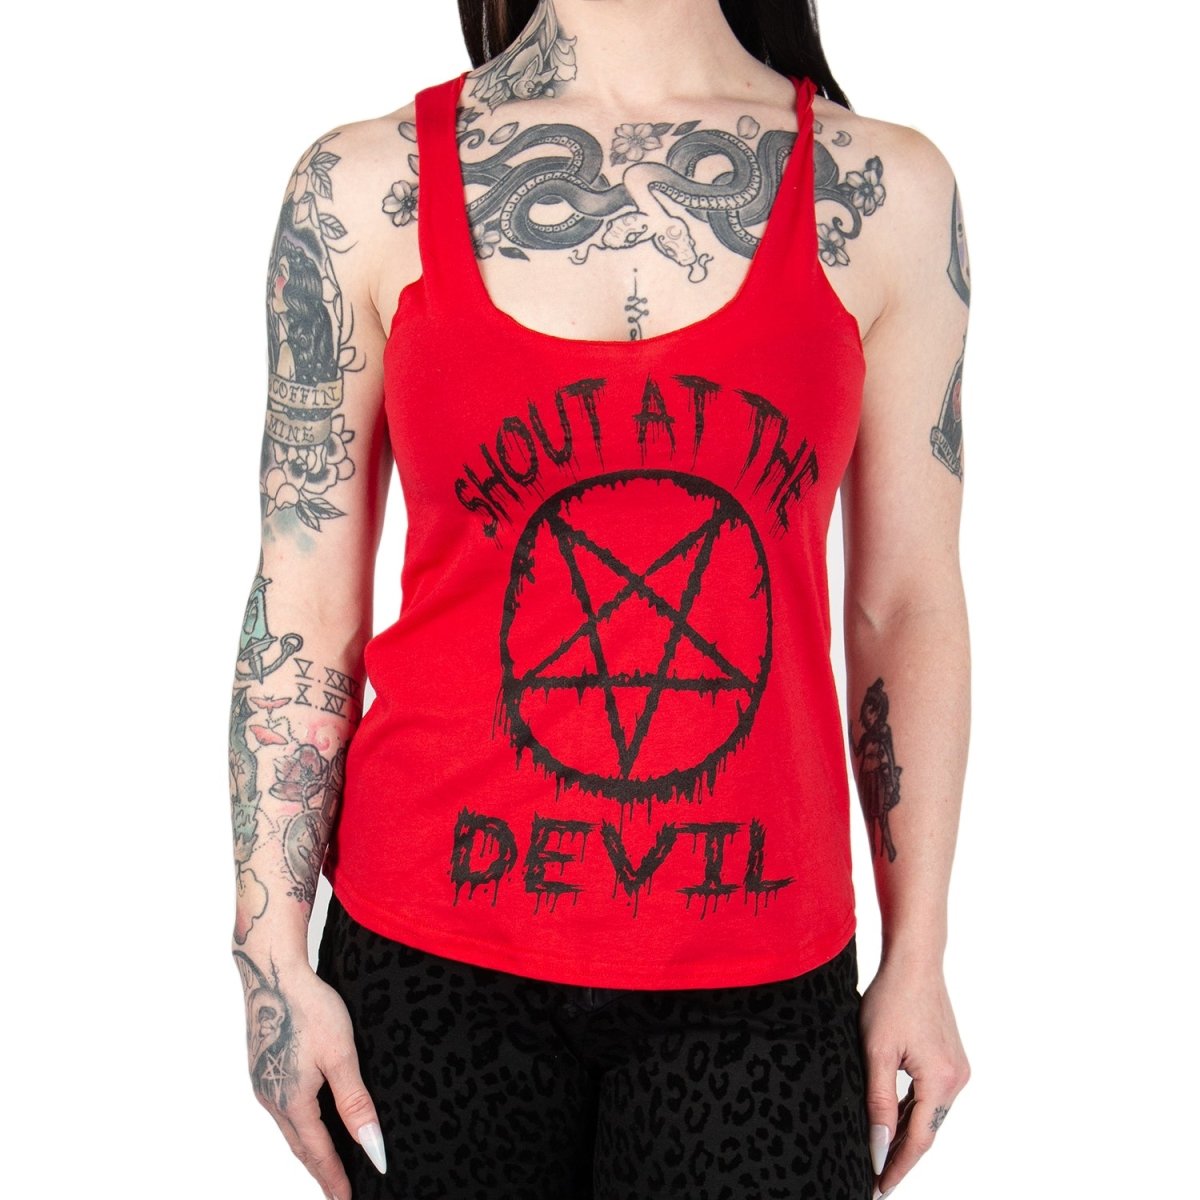 Too Fast | Switchblade Stiletto | Shout At The Devil Racer Tank Top